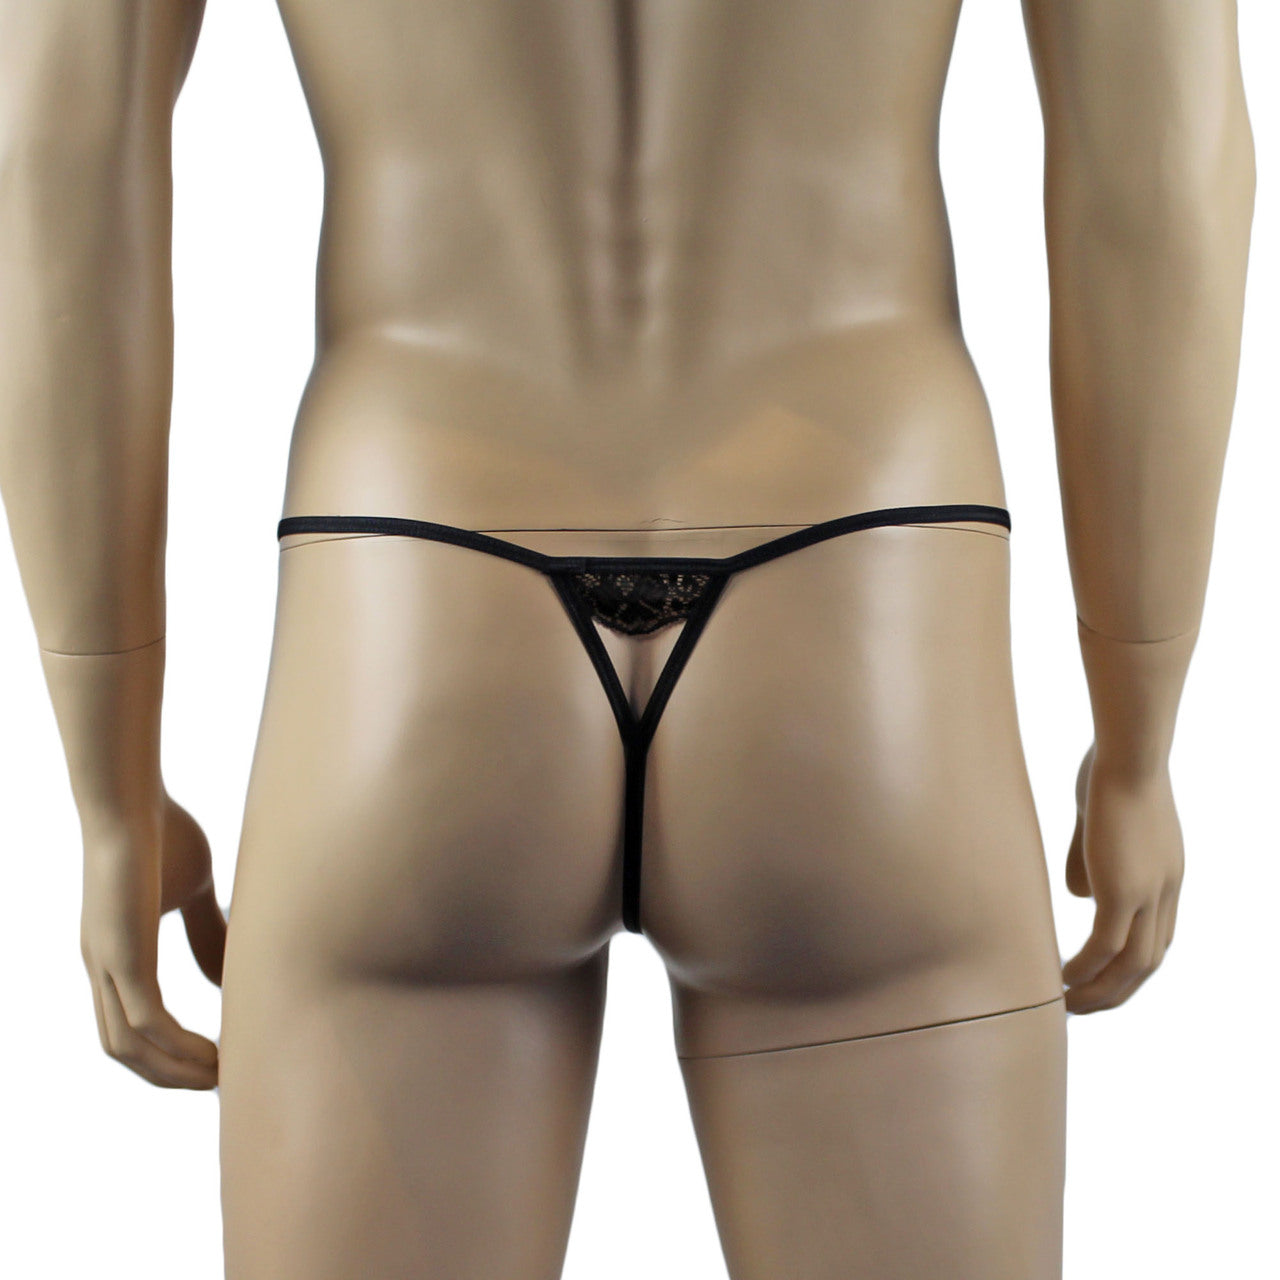 Mens Lucy Feminine Satin, Lace and Bow Pouch G string Purple and Black